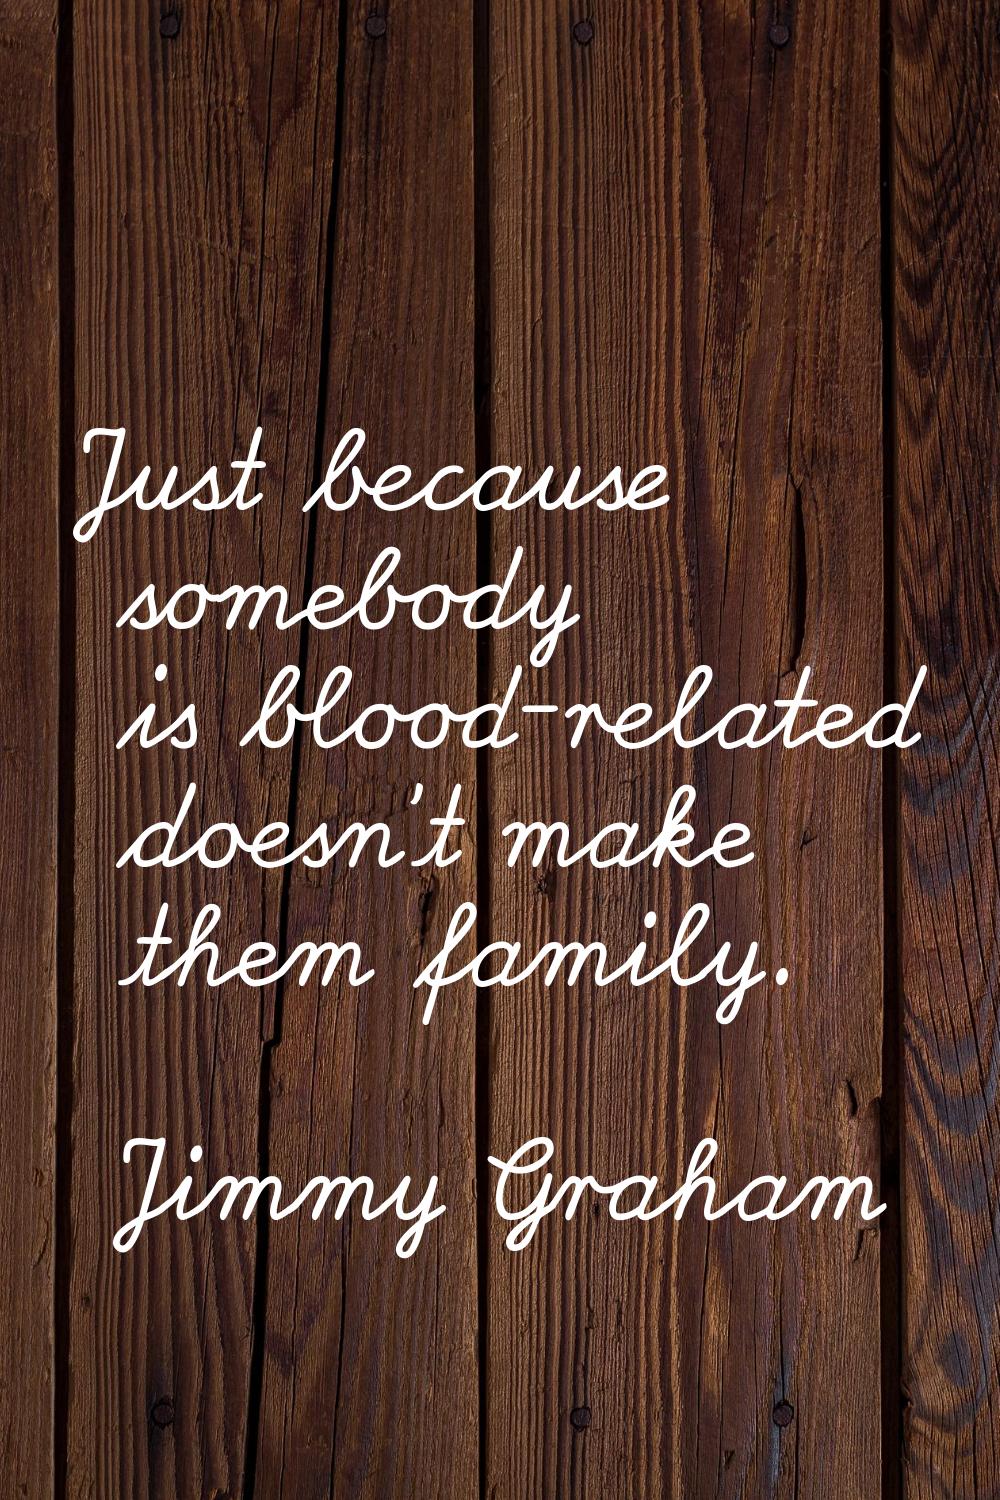 Just because somebody is blood-related doesn't make them family.